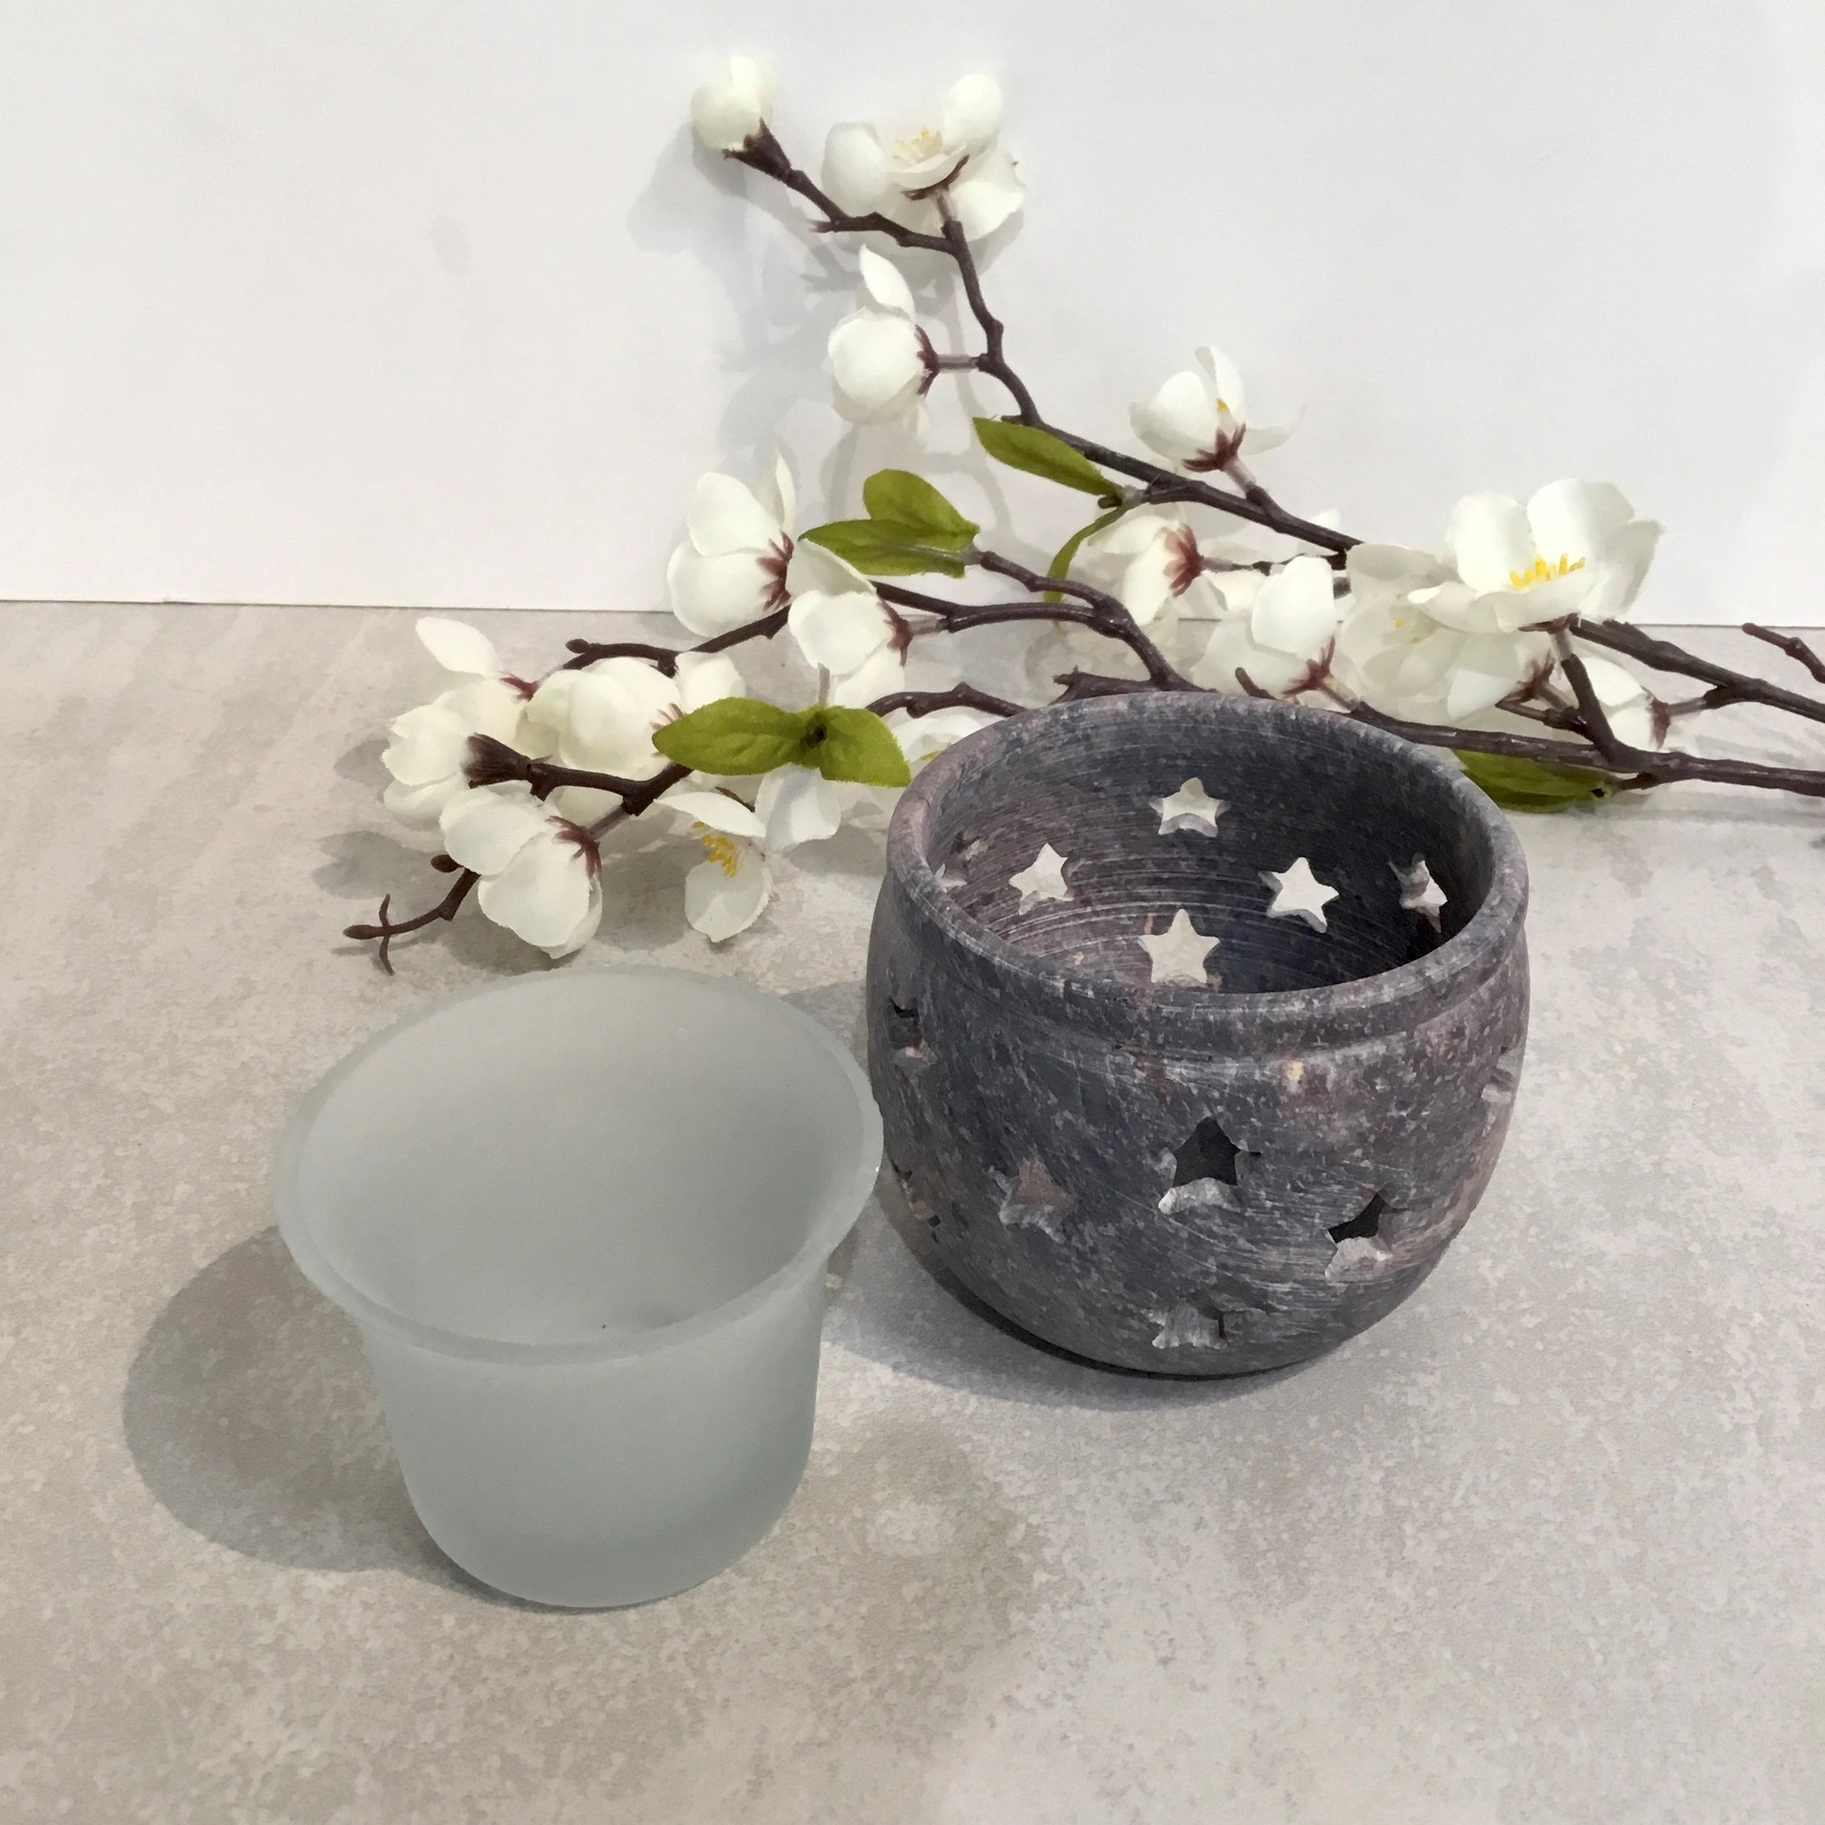 Stone votive tealight candle holder with star cutout design, on a grey surface in front of white flowers.